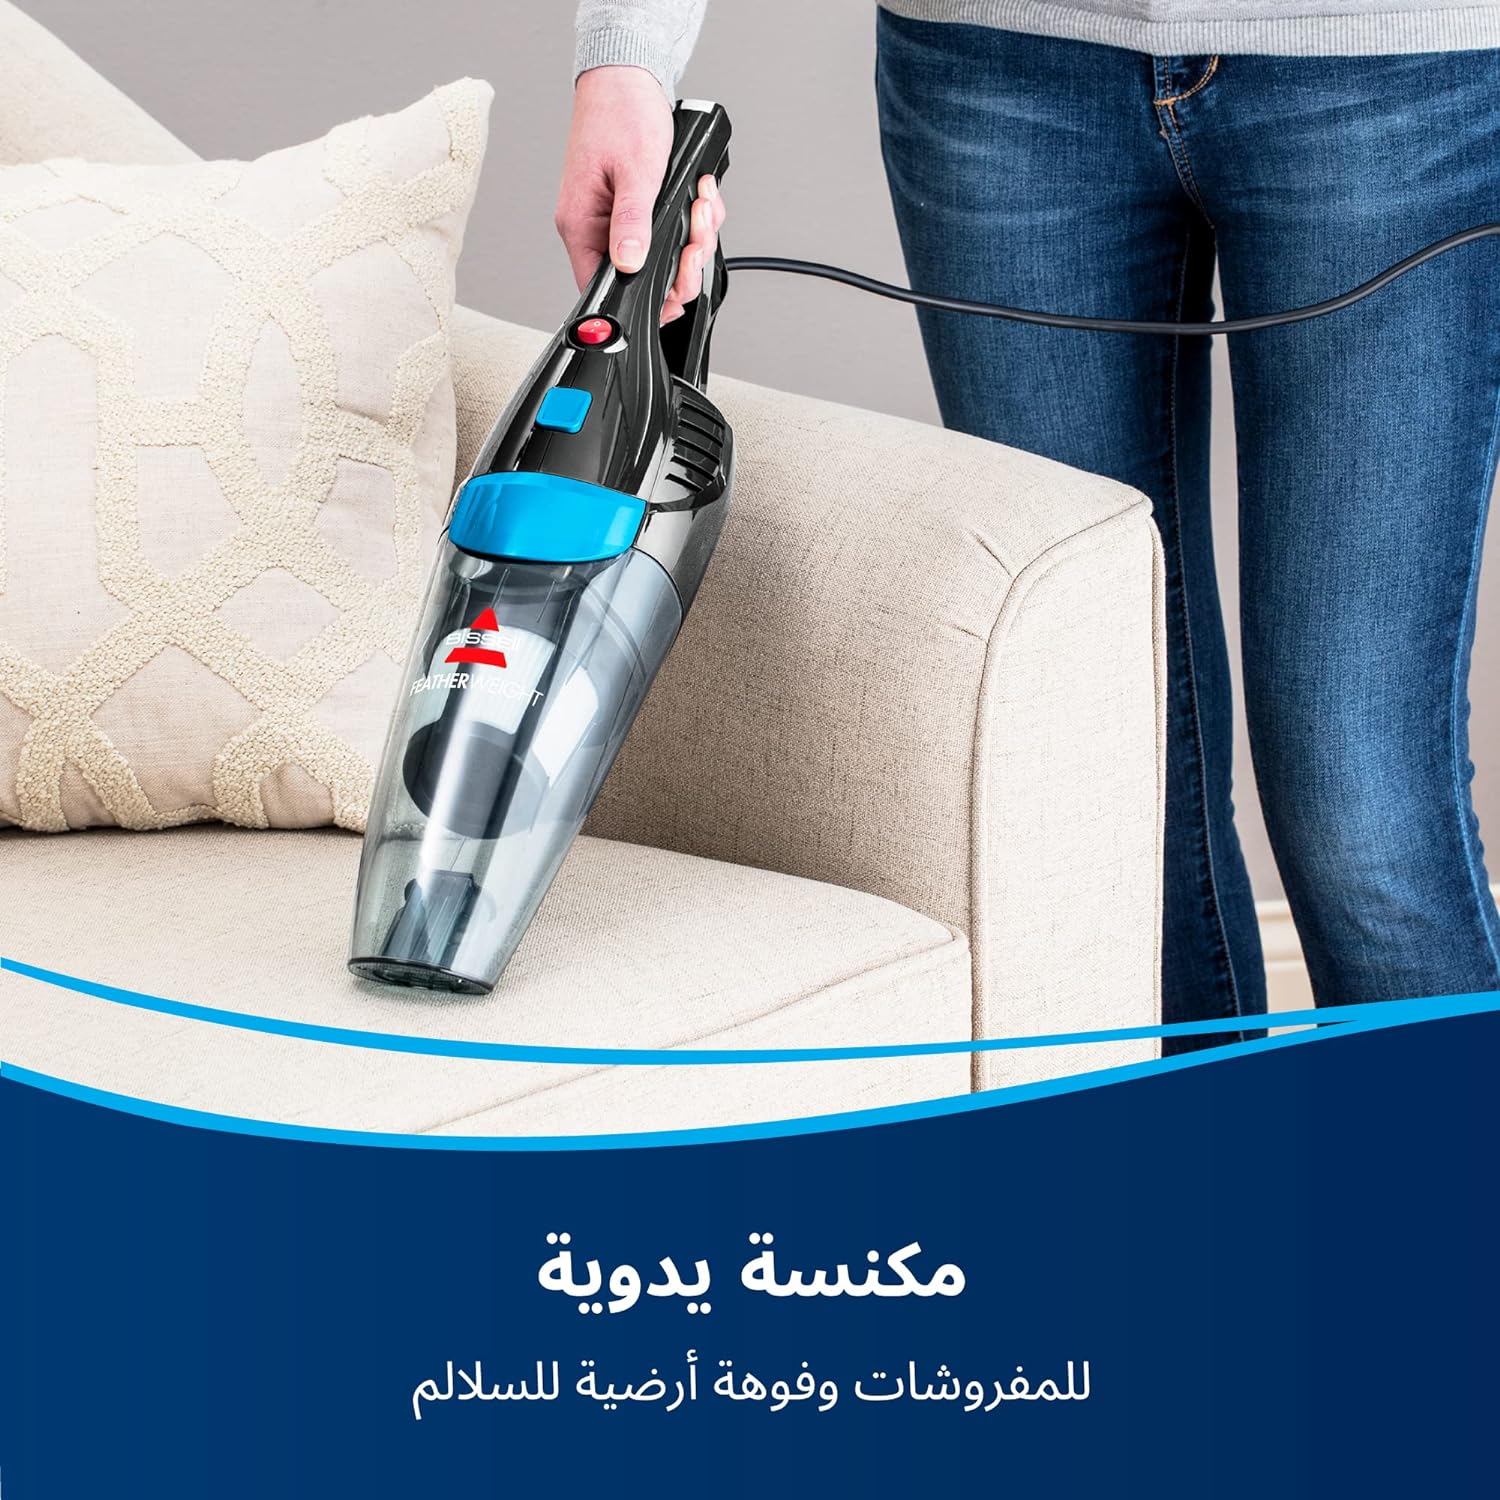 Bissell Featherweight 2-in-1 Upright Vacuum Cleaner 0.5 Litre 450 W, 2024e, Titanium/Bossanova Blue, 2 Year Brand Warranty